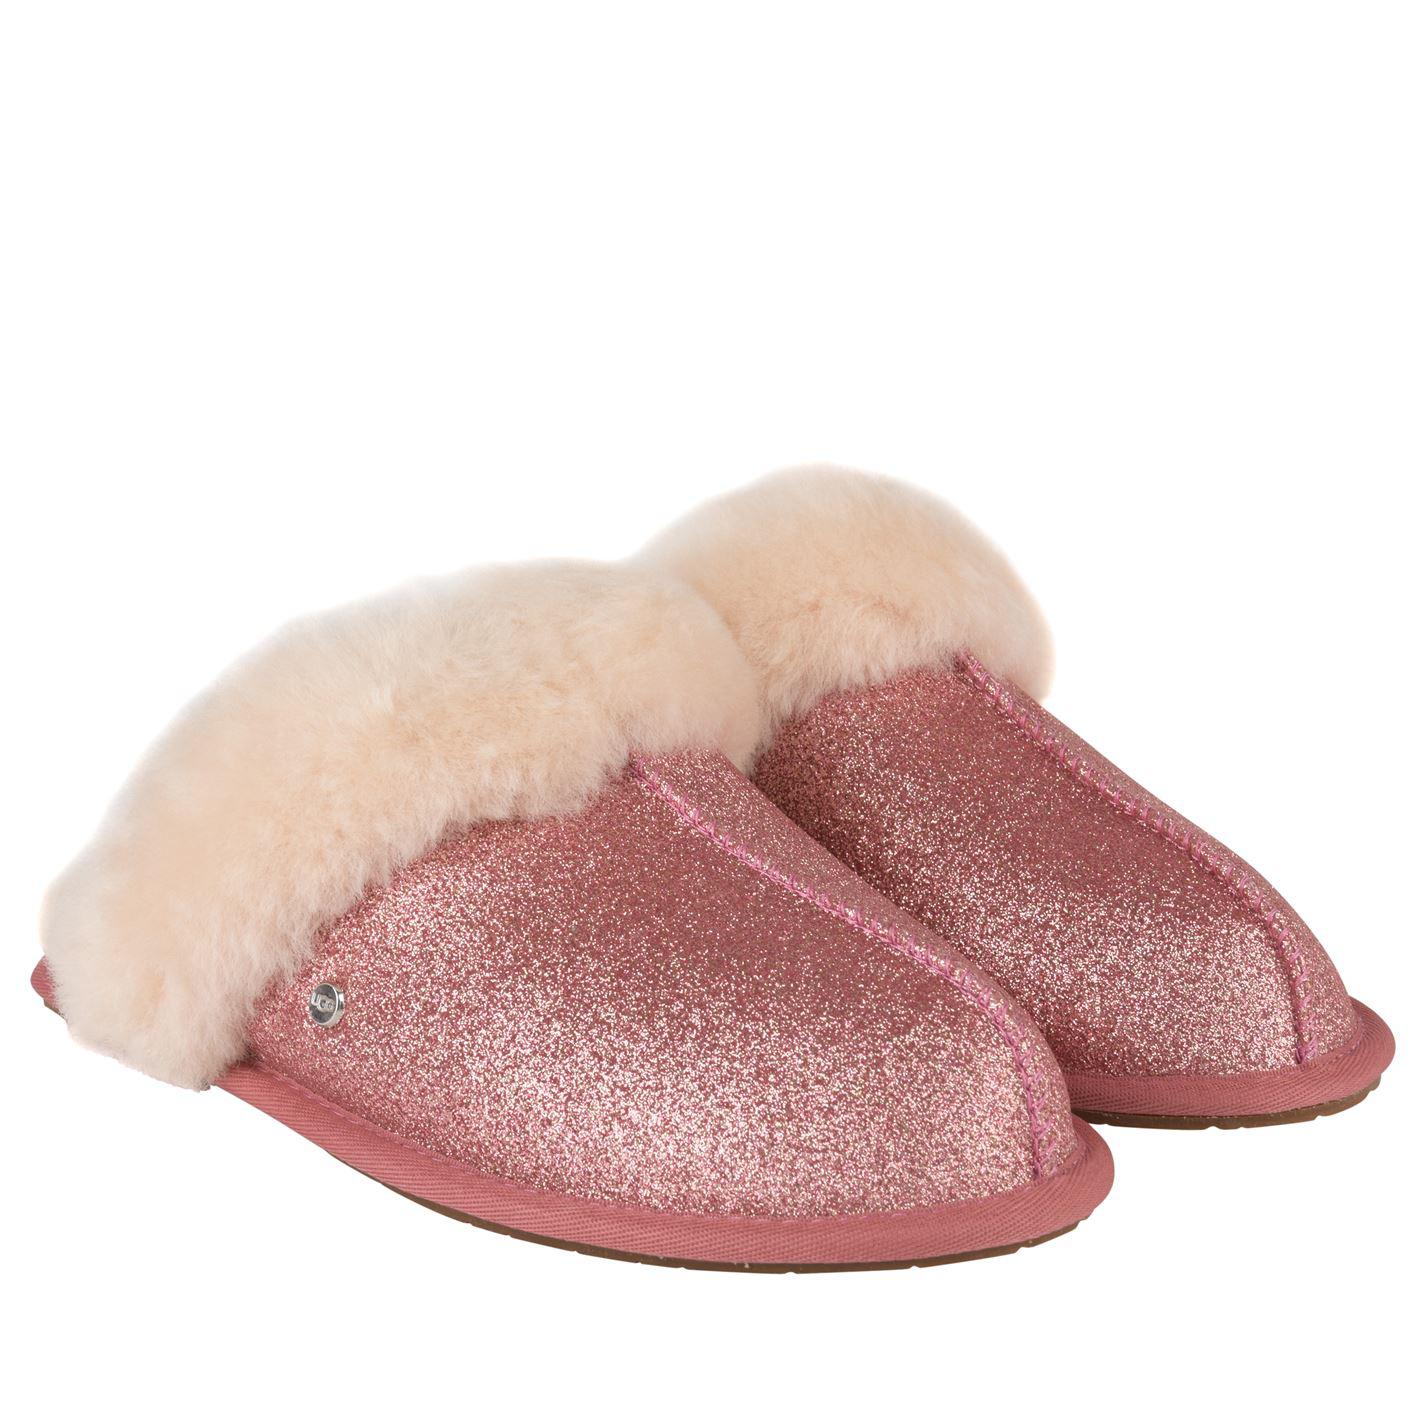 Ugg Pink Glitter Slippers Store, SAVE 37% - aveclumiere.com